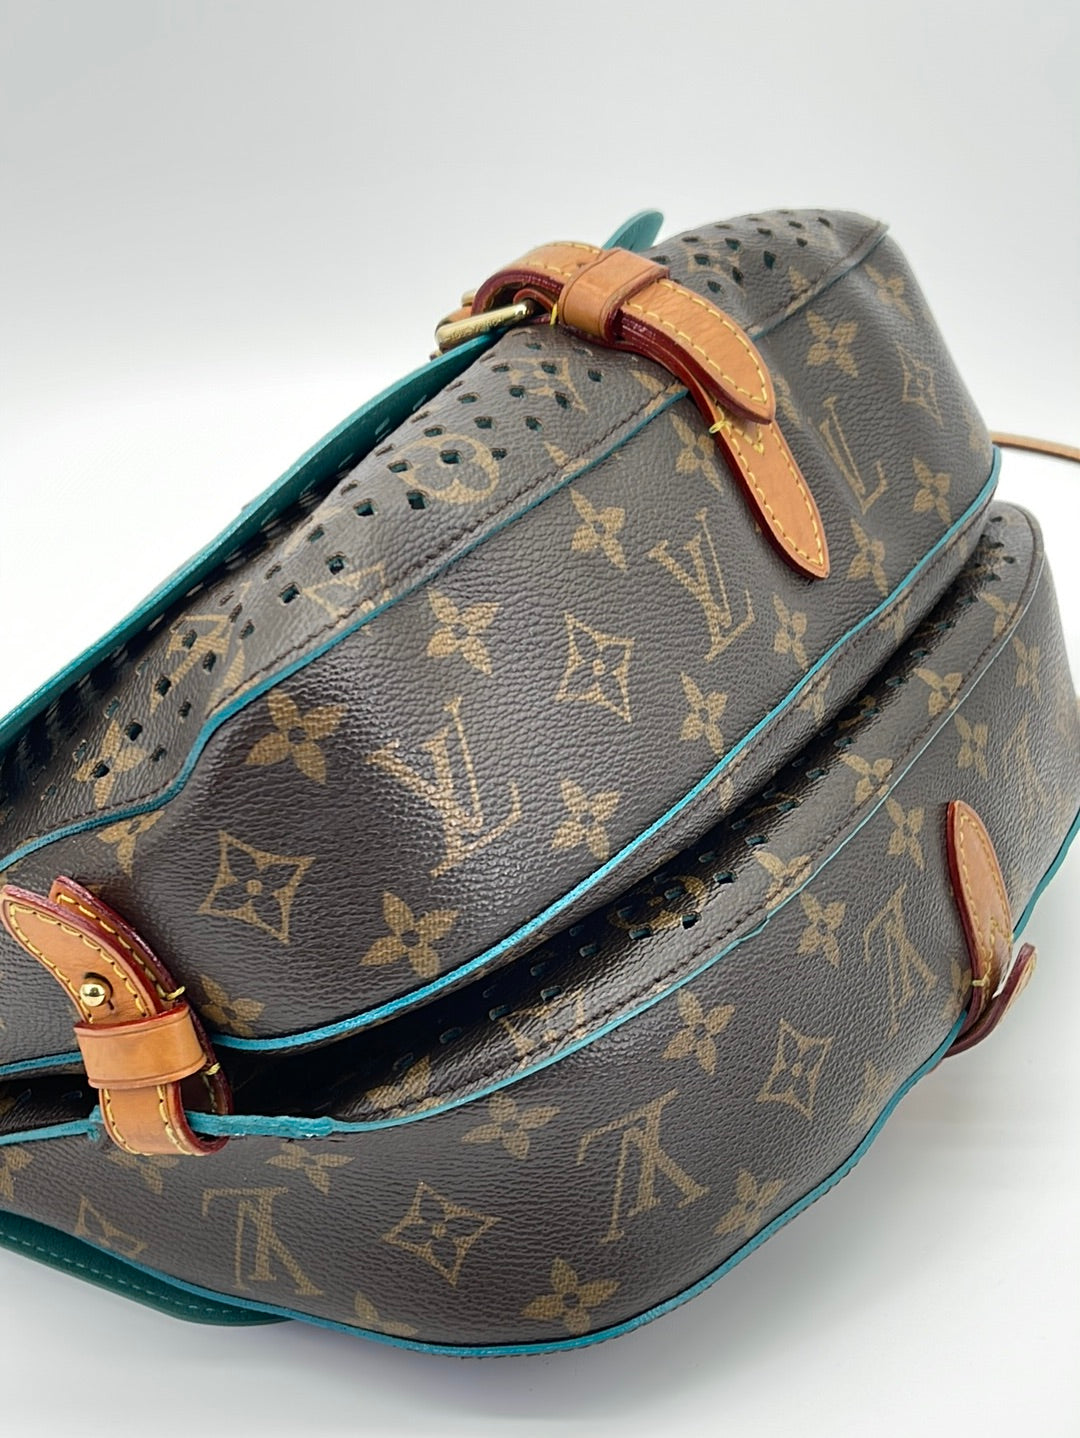 Louis Vuitton 2011 pre-owned Perforated Monogram Saumur Flore